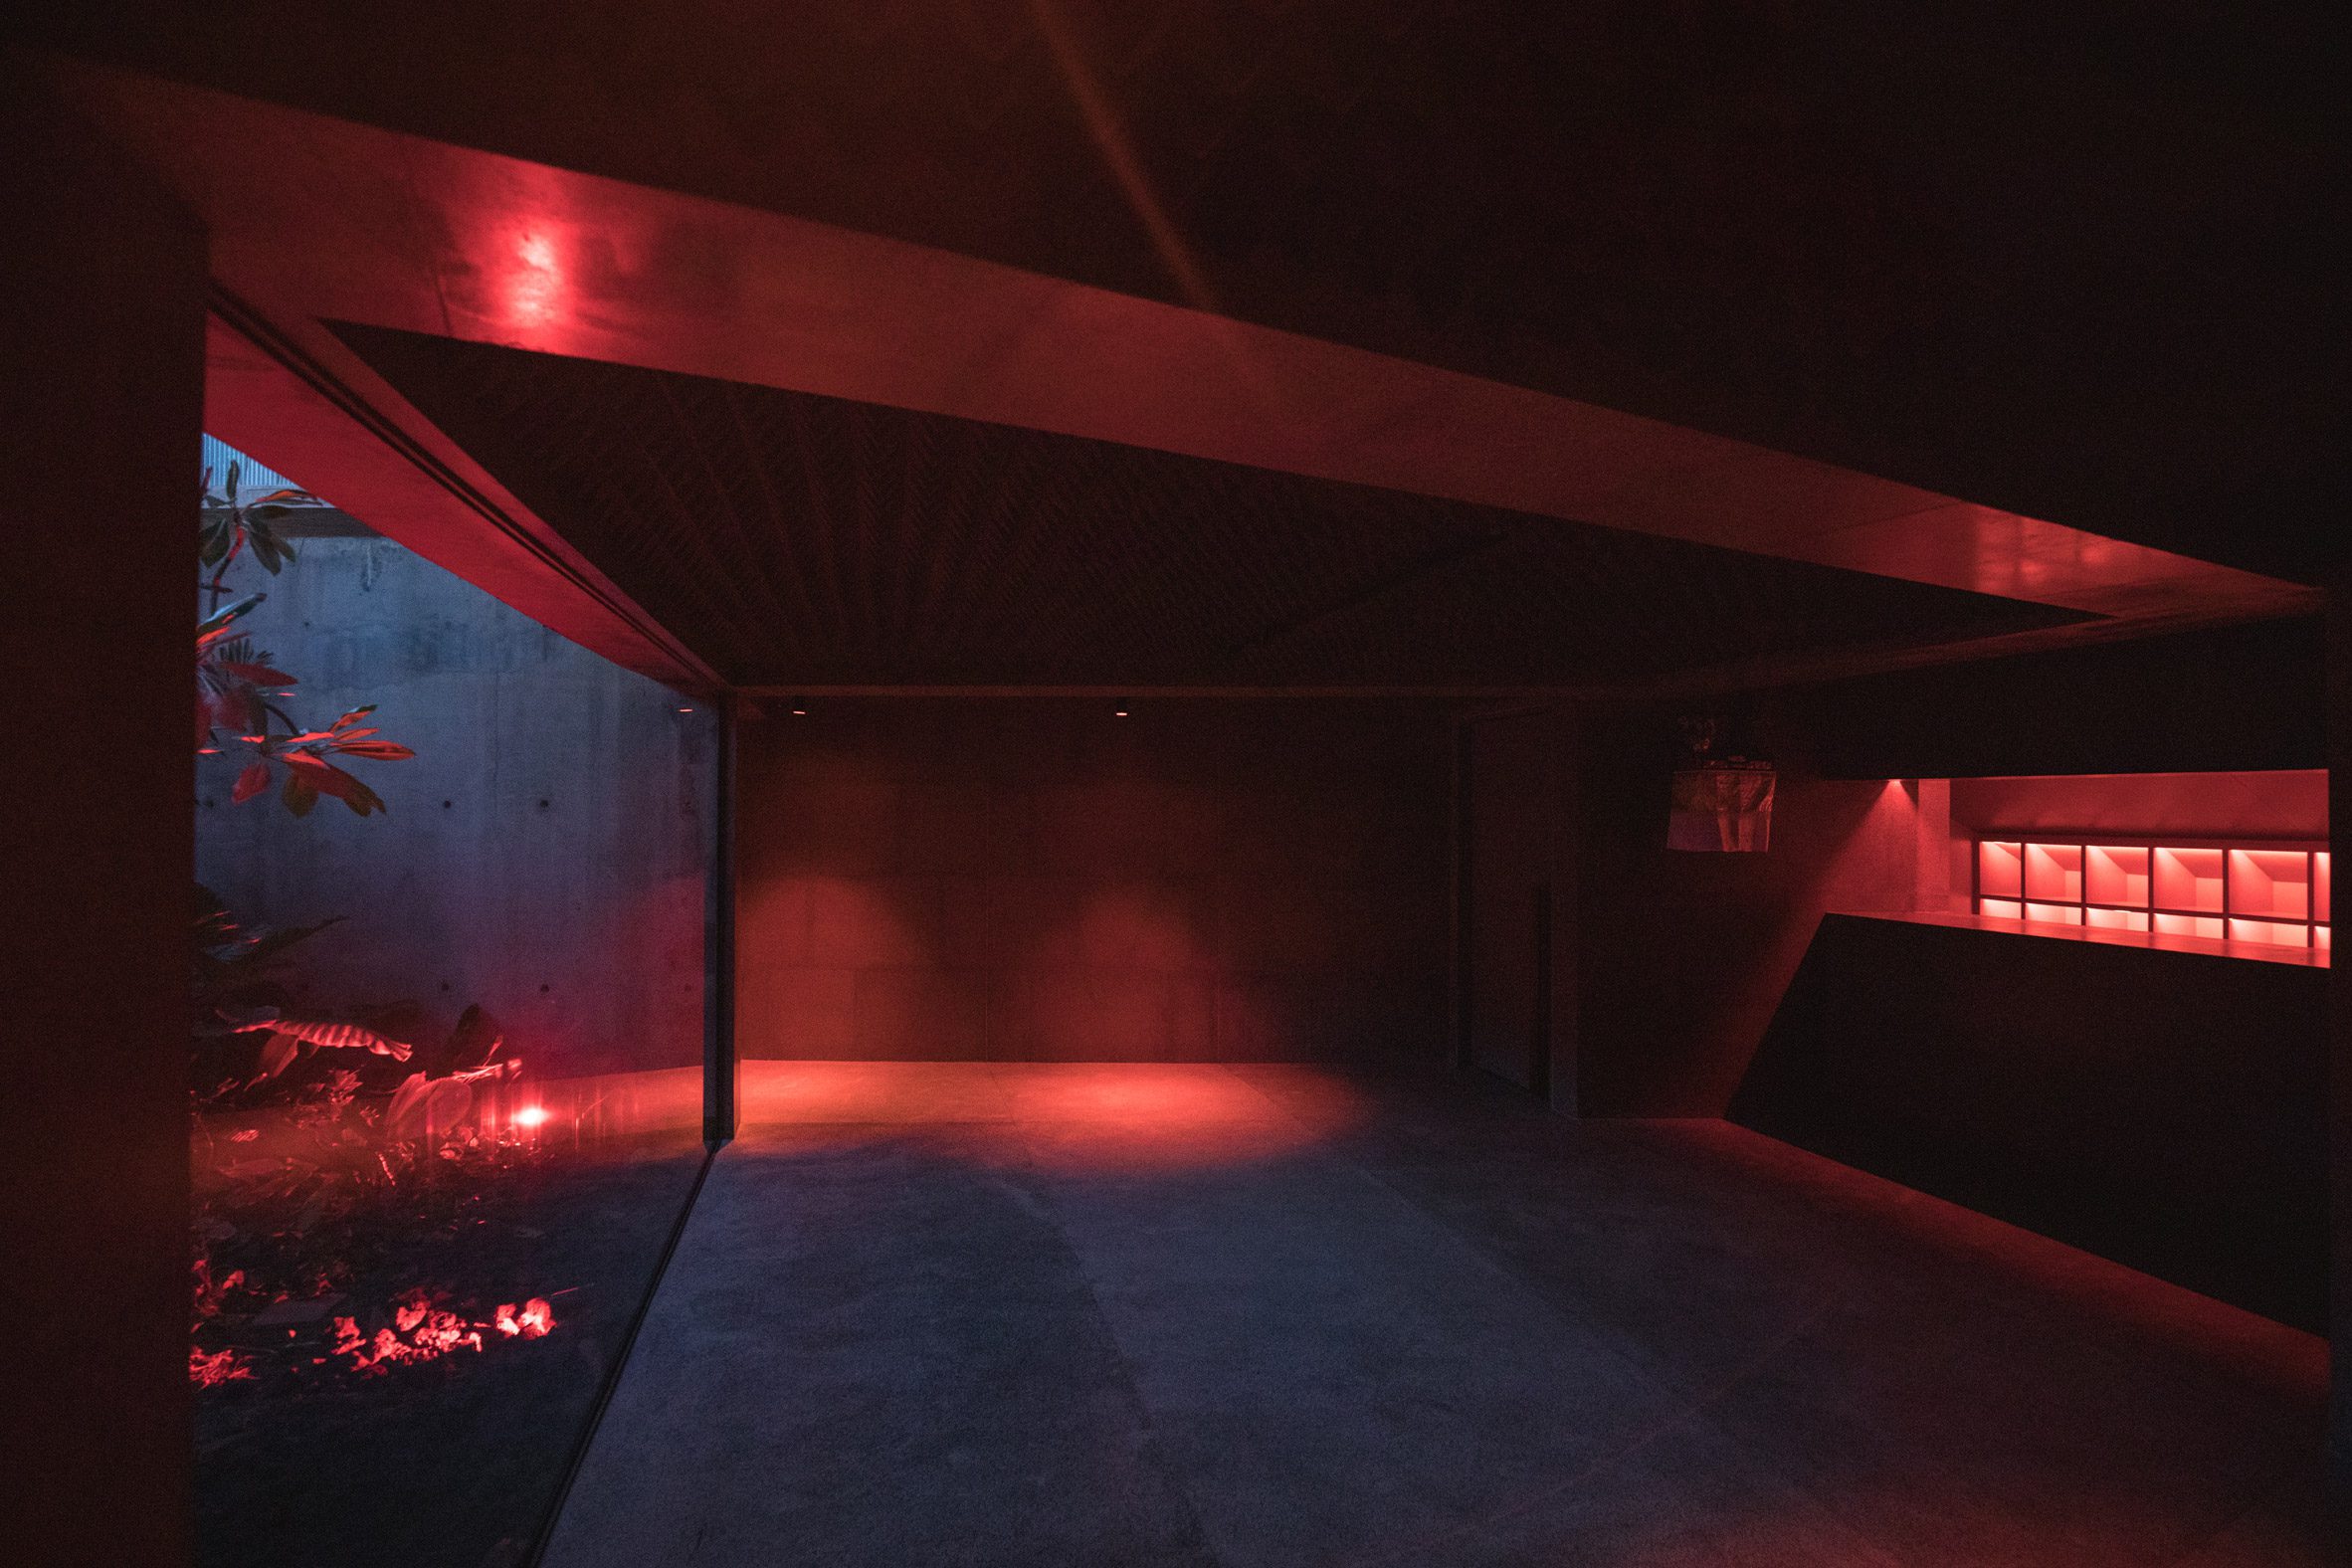 Concrete room with red lighting